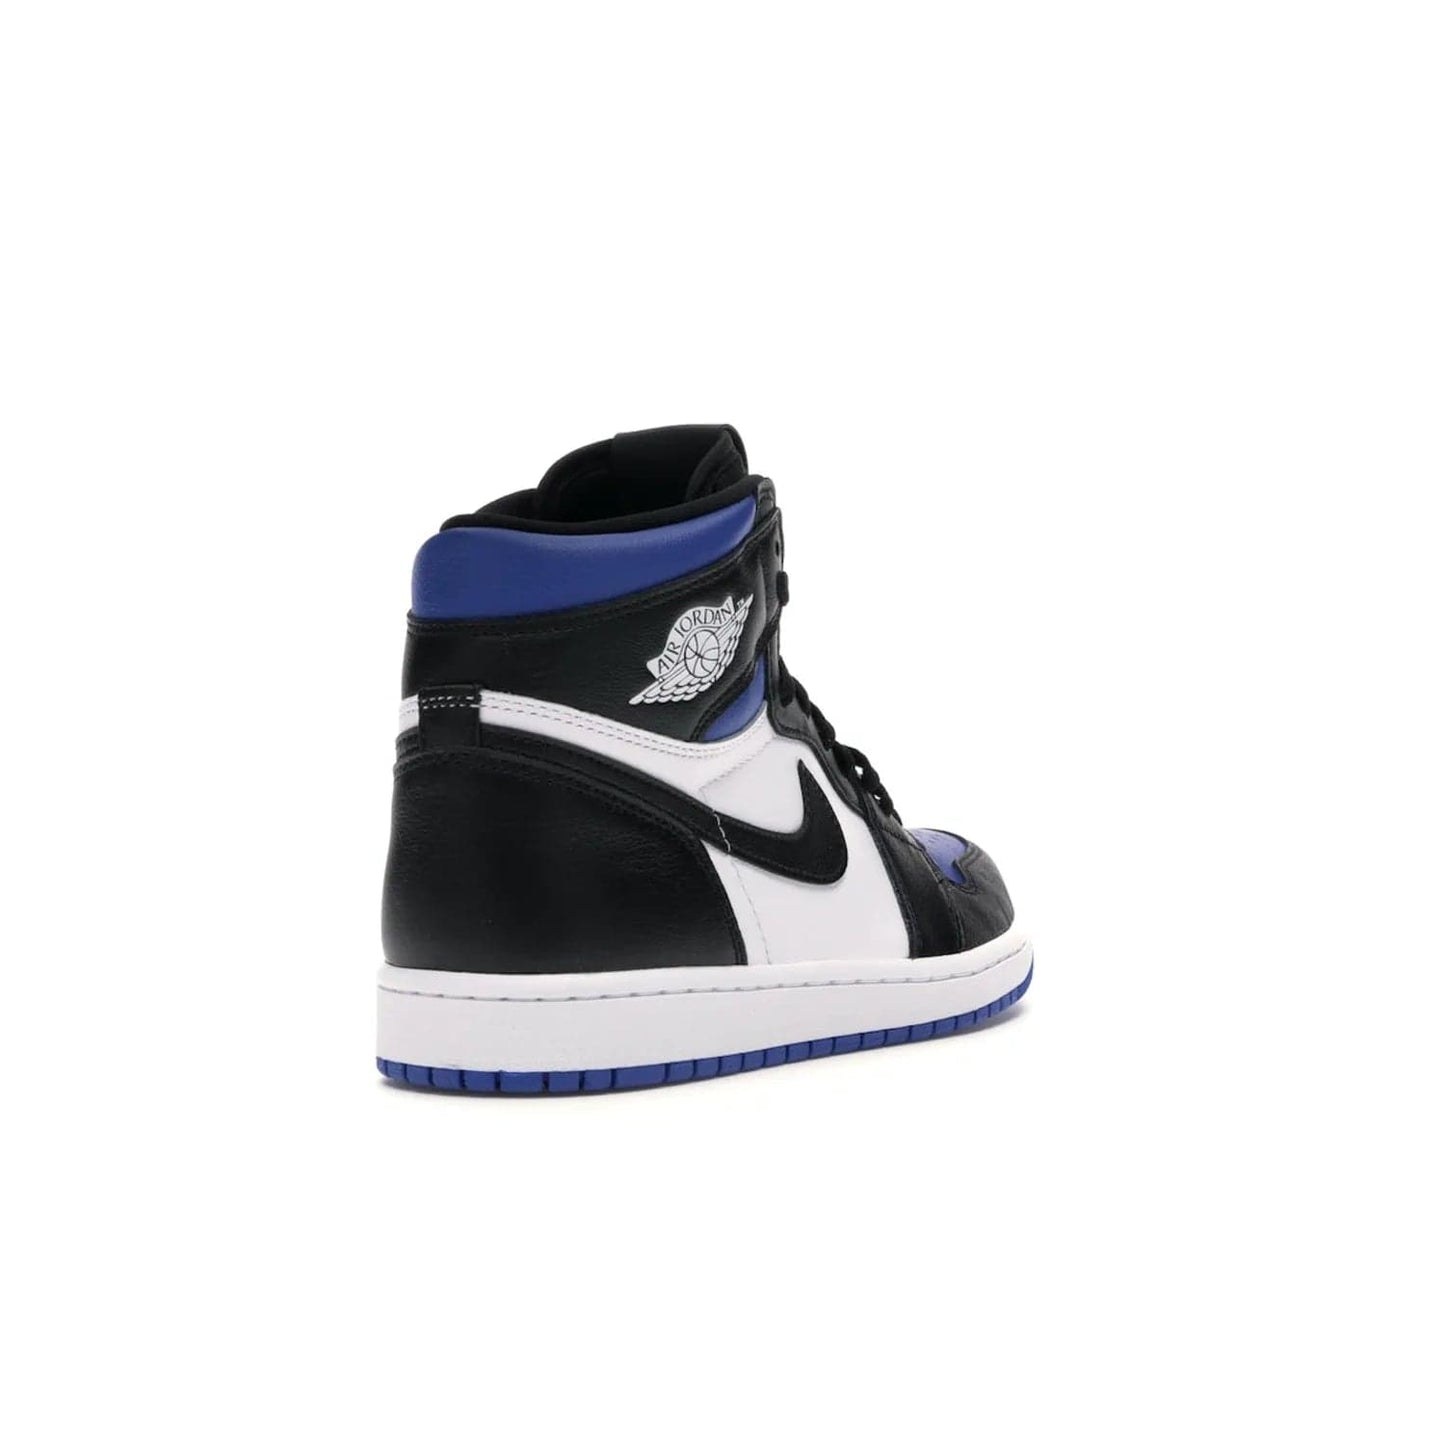 Jordan 1 Retro High Royal Toe - Image 31 - Only at www.BallersClubKickz.com - Refresh your look with the Jordan 1 Retro High Royal Toe. This classic AJ 1 sports a white and royal leather upper, black leather overlays, and branded leather tongue tag. Pick up today and set the streets ablaze.